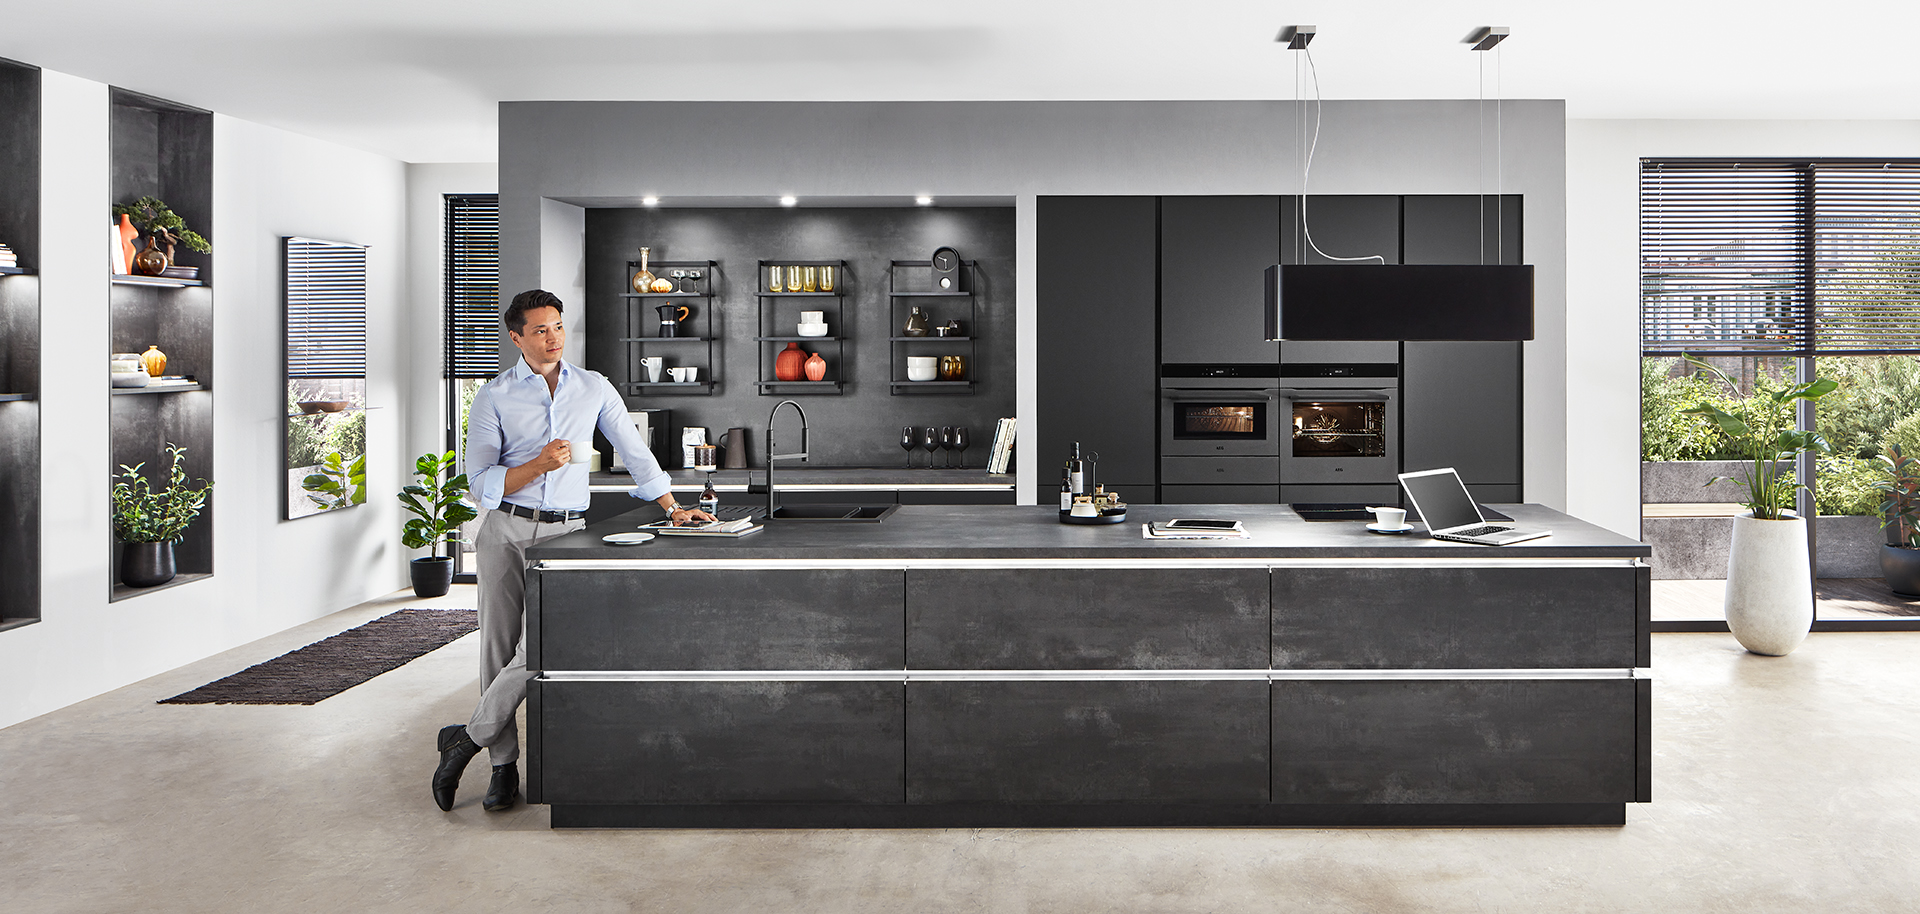 Modern kitchen interior featuring a sleek design with black cabinetry, built-in appliances, and a person preparing food on the island countertop.